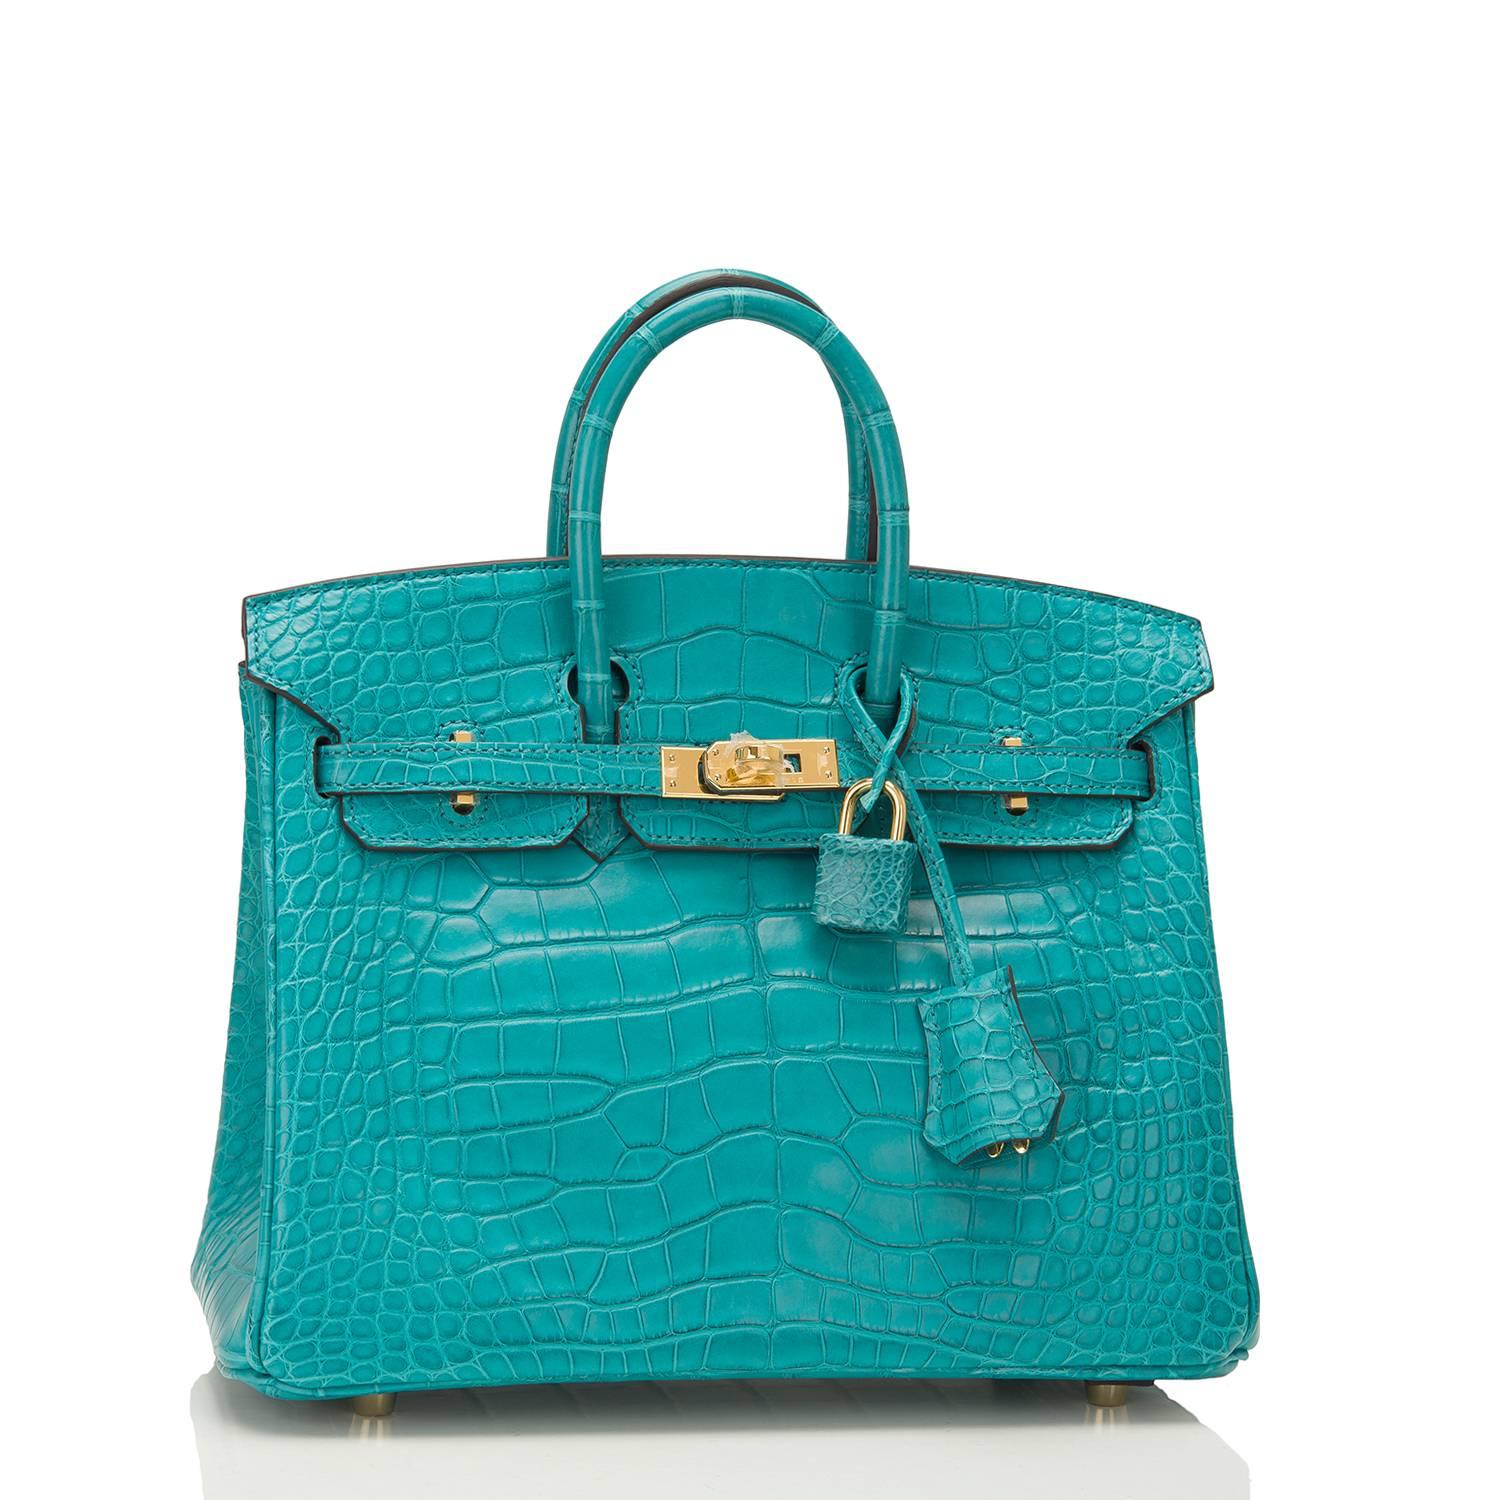 Hermes Blue Paon Birkin 25cm in matte alligator with gold hardware.

This Birkin has tonal stitching, a front toggle closure, a clochette with lock and two keys, and double rolled handles.

The interior is lined with Blue Paon chevre and has one